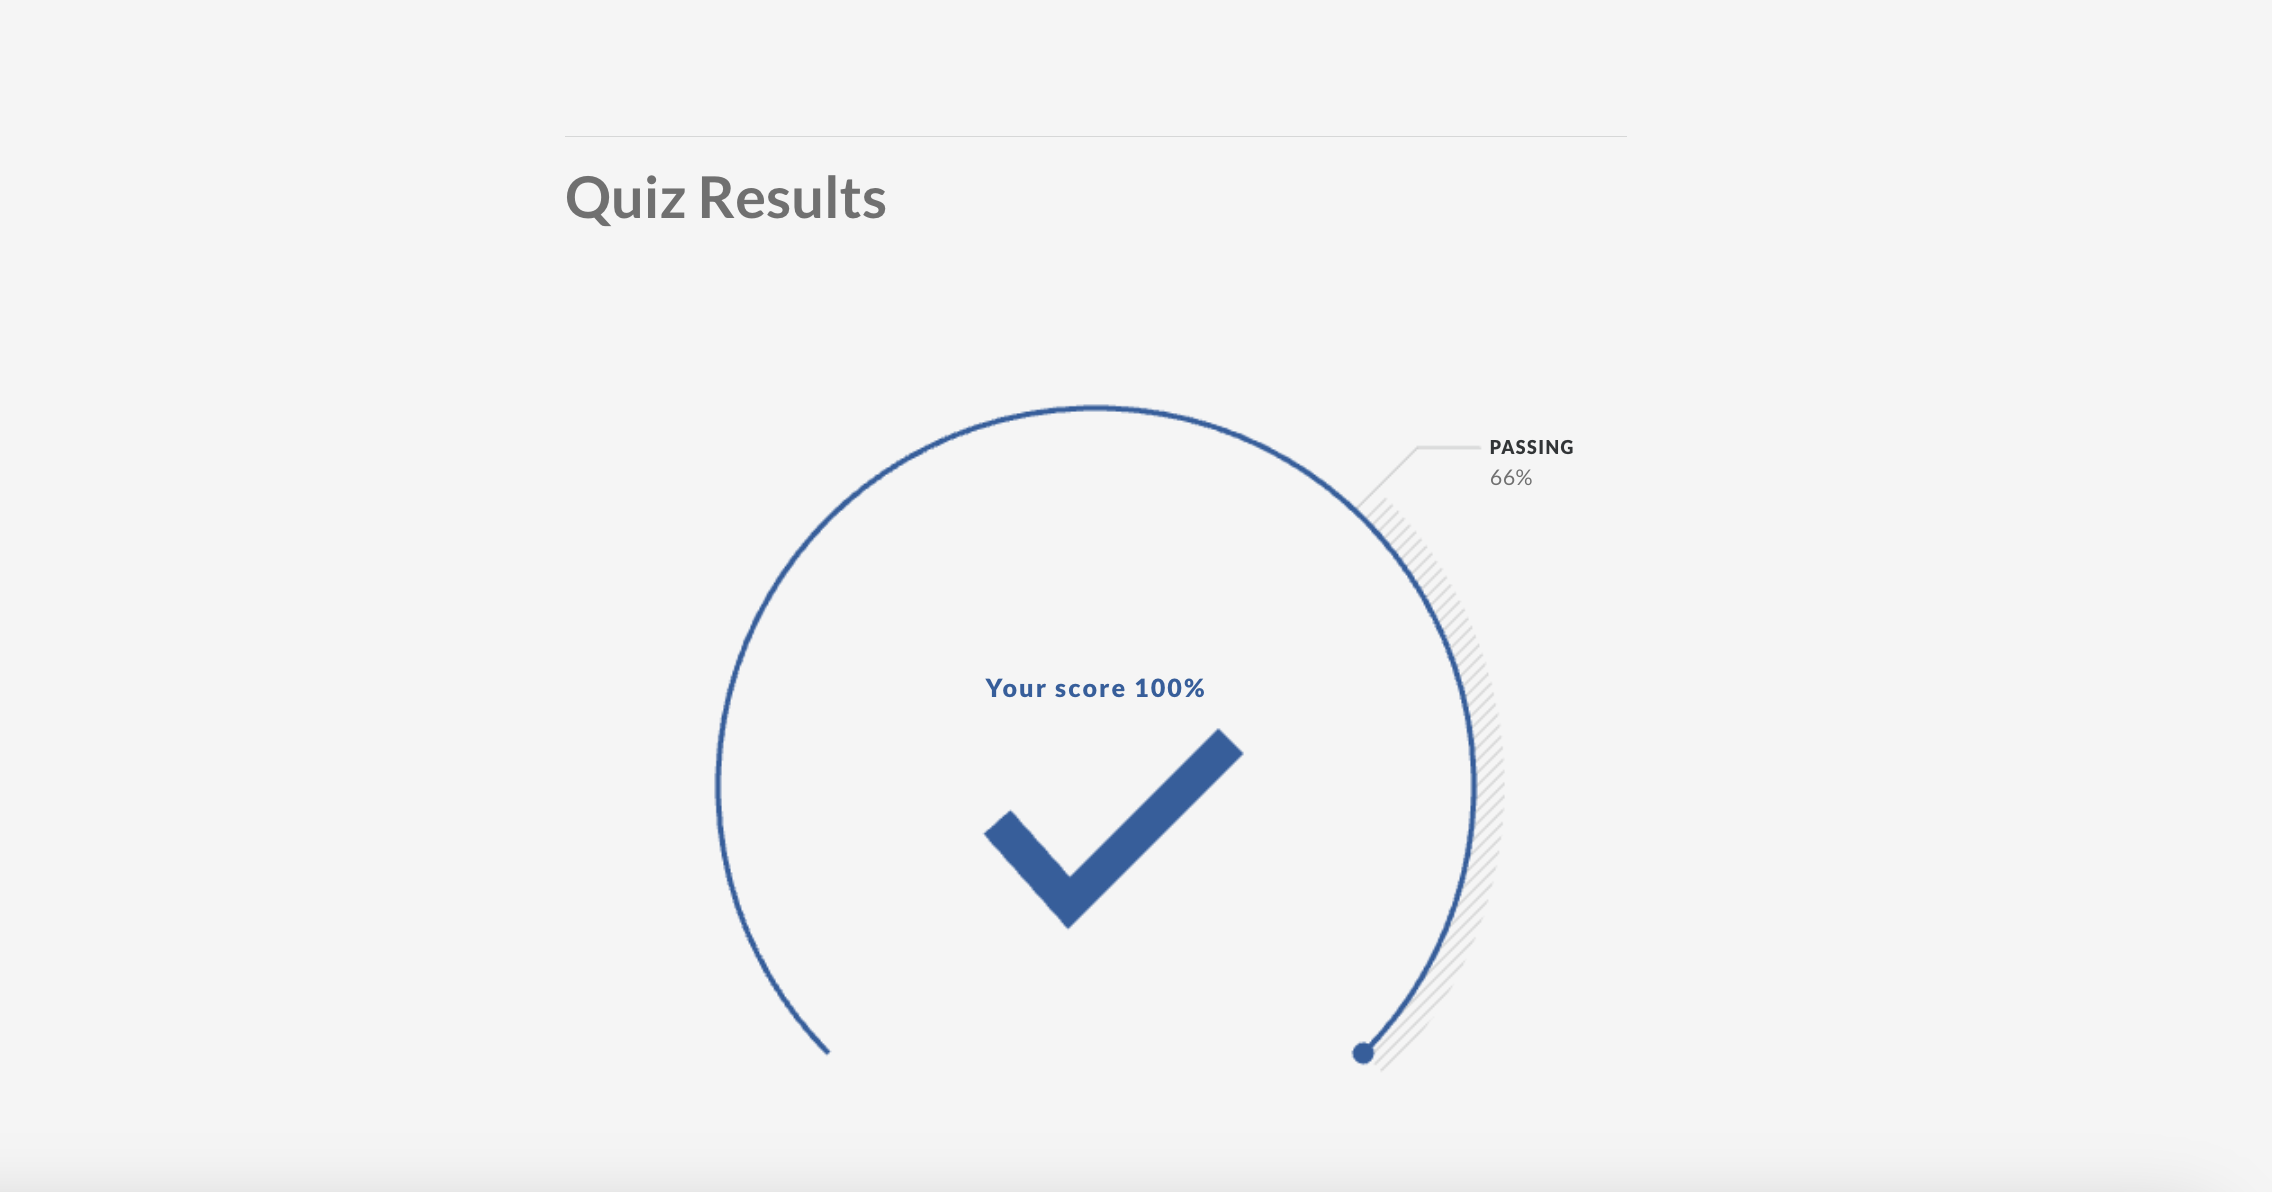 Results from a quiz completed in a customer service training course